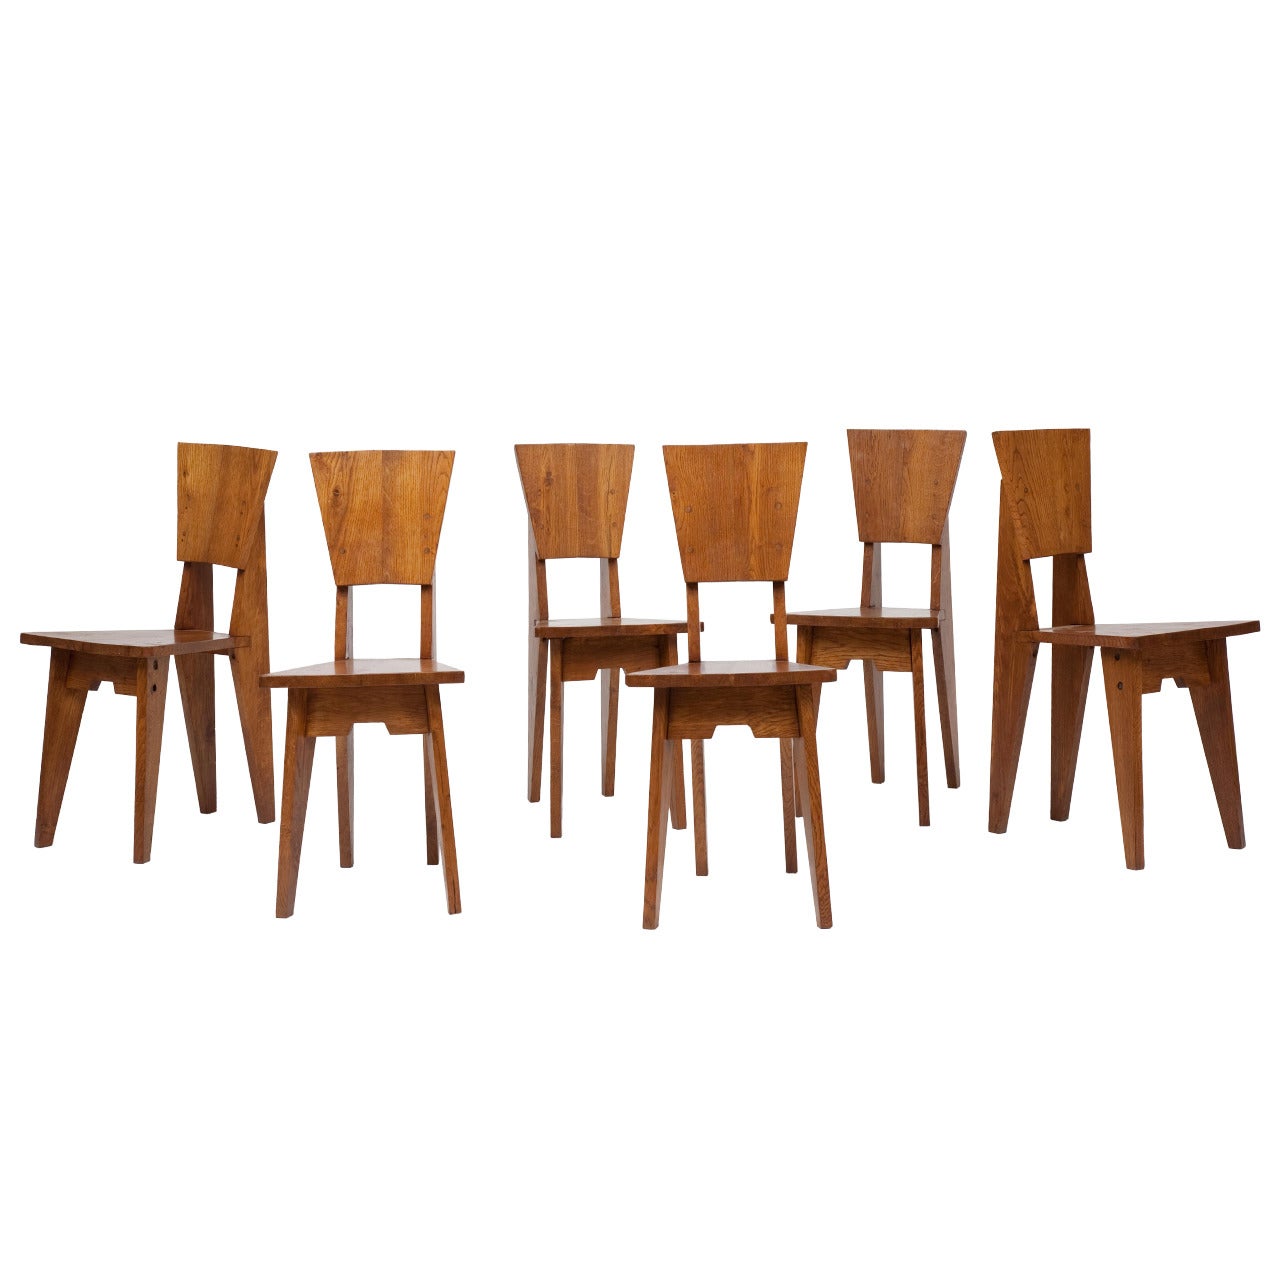 Jean-René Caillette, Set of Six Wooden Chairs, circa 1950